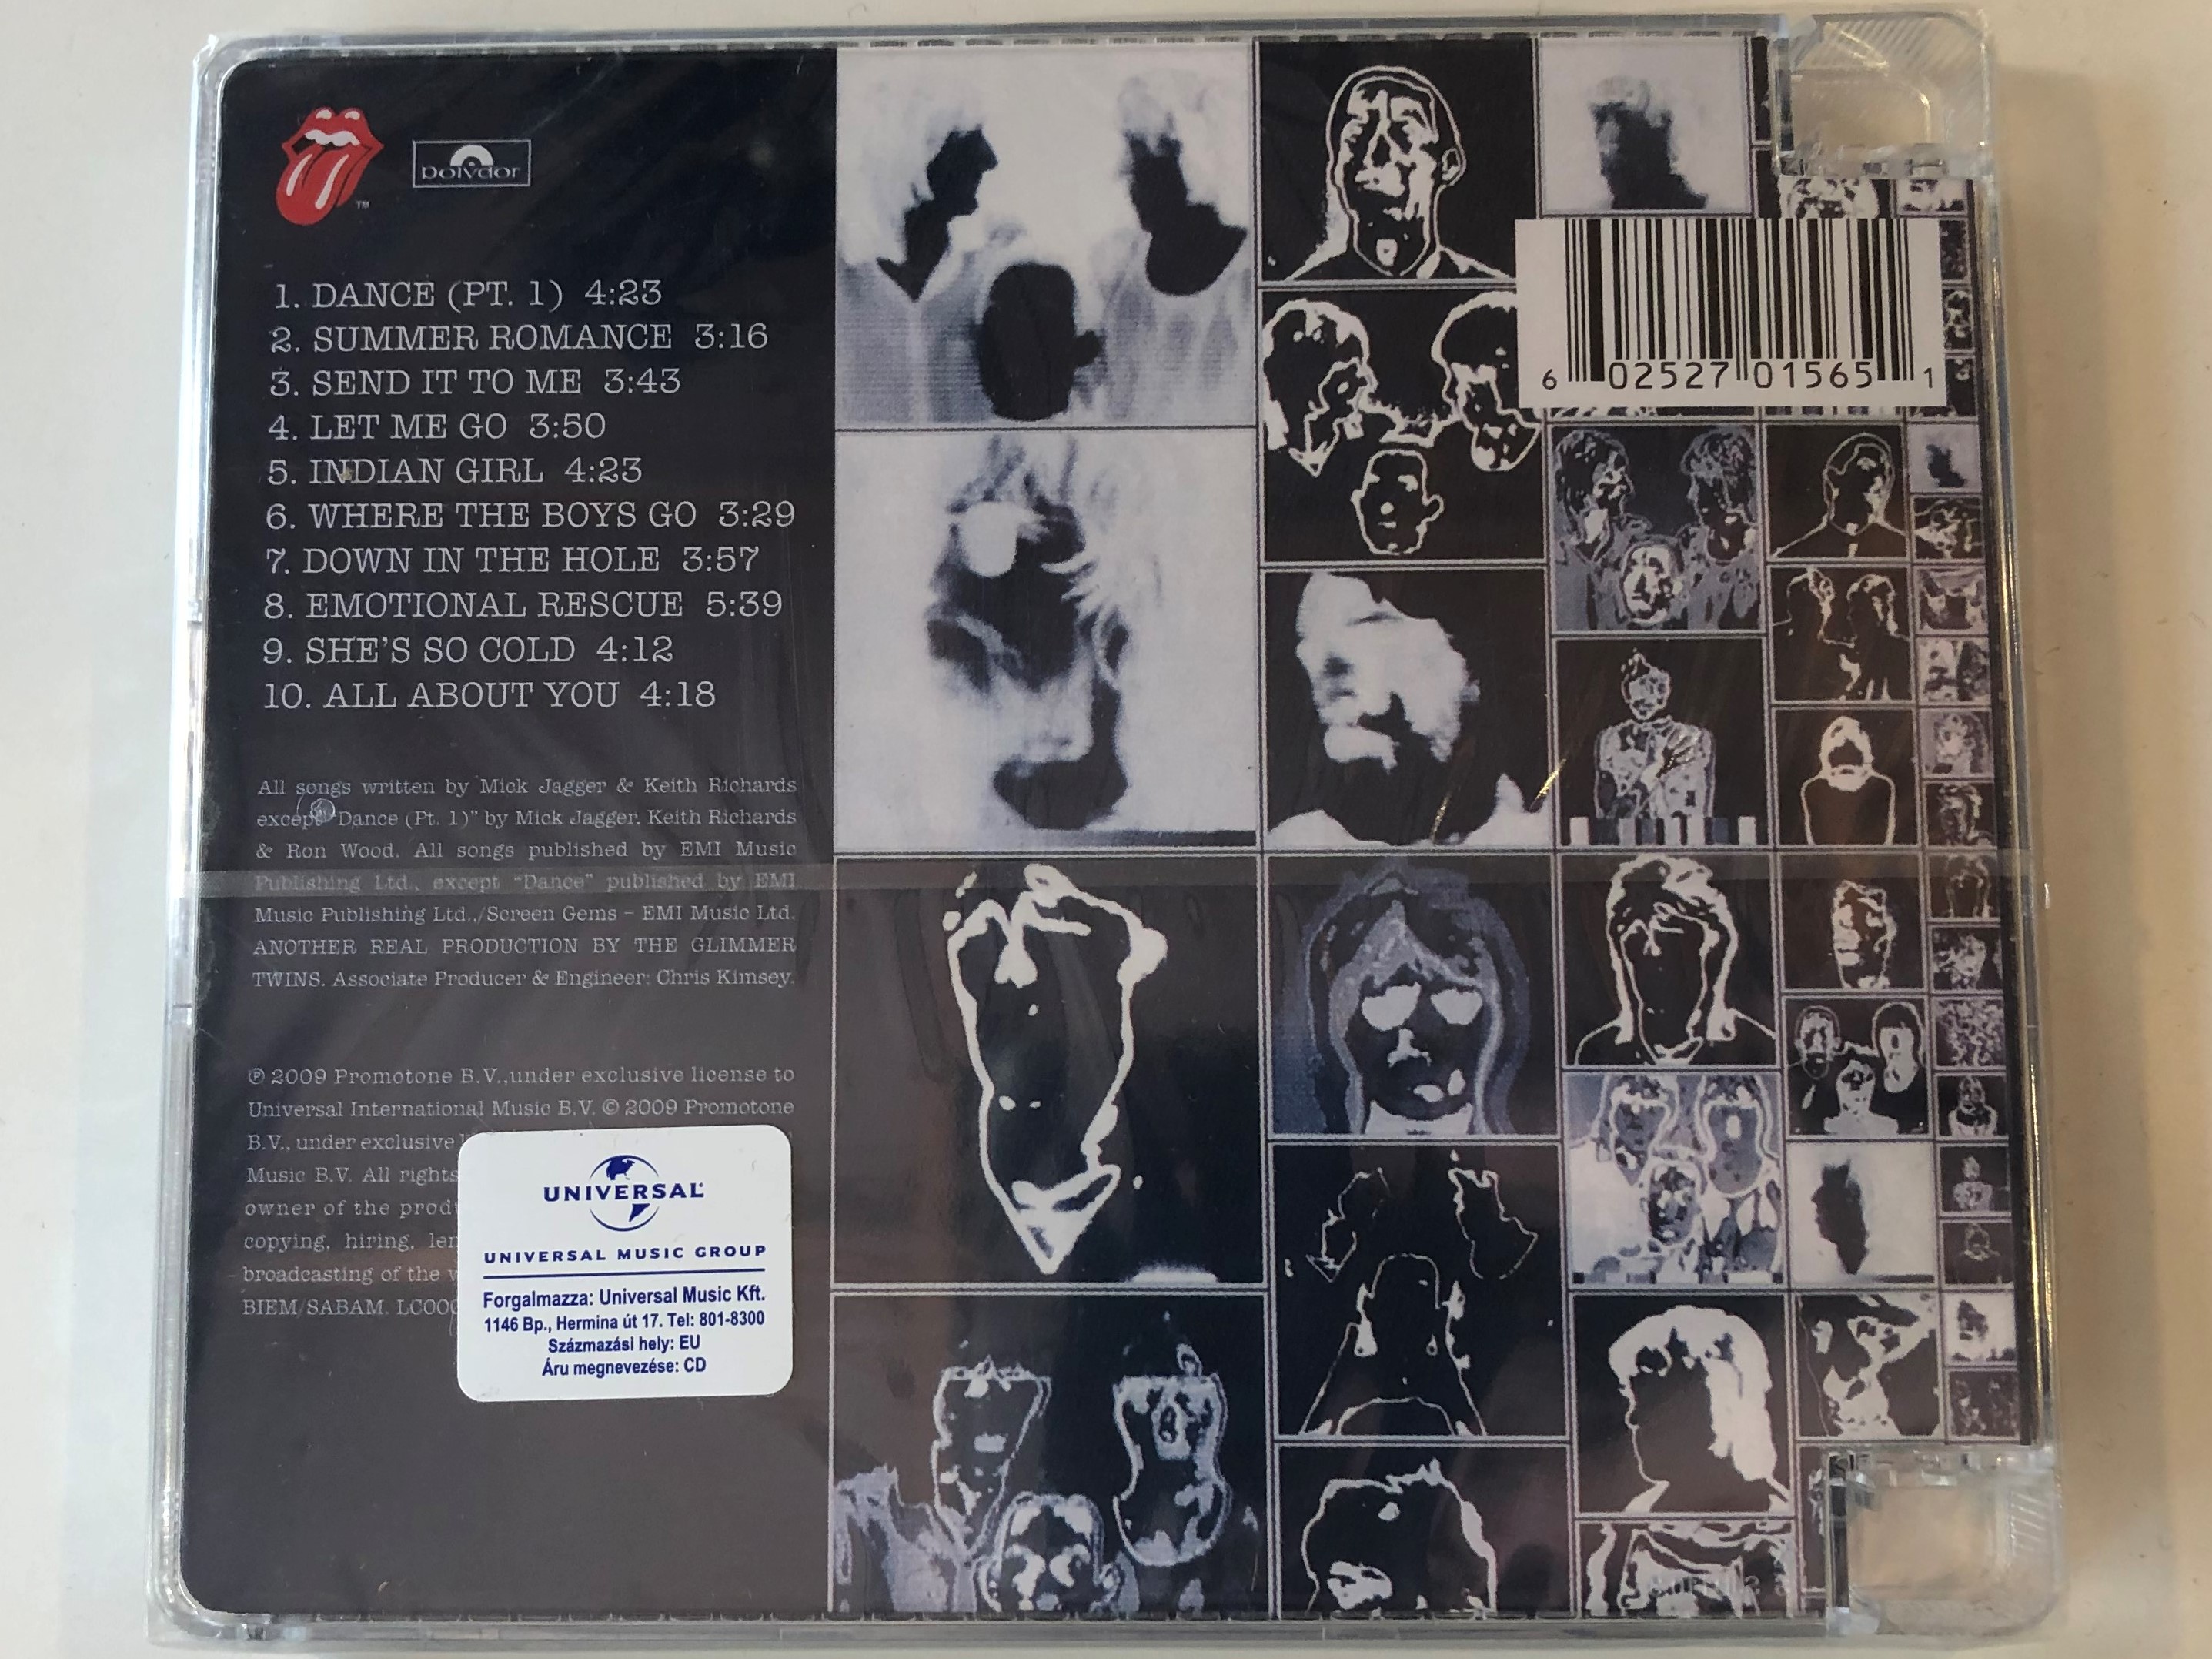 the-rolling-stones-emotional-rescue-includes...-she-s-so-cold-emotional-rescue-dance-pt.-1-polydor-audio-cd-2009-0602527015651-2-.jpg